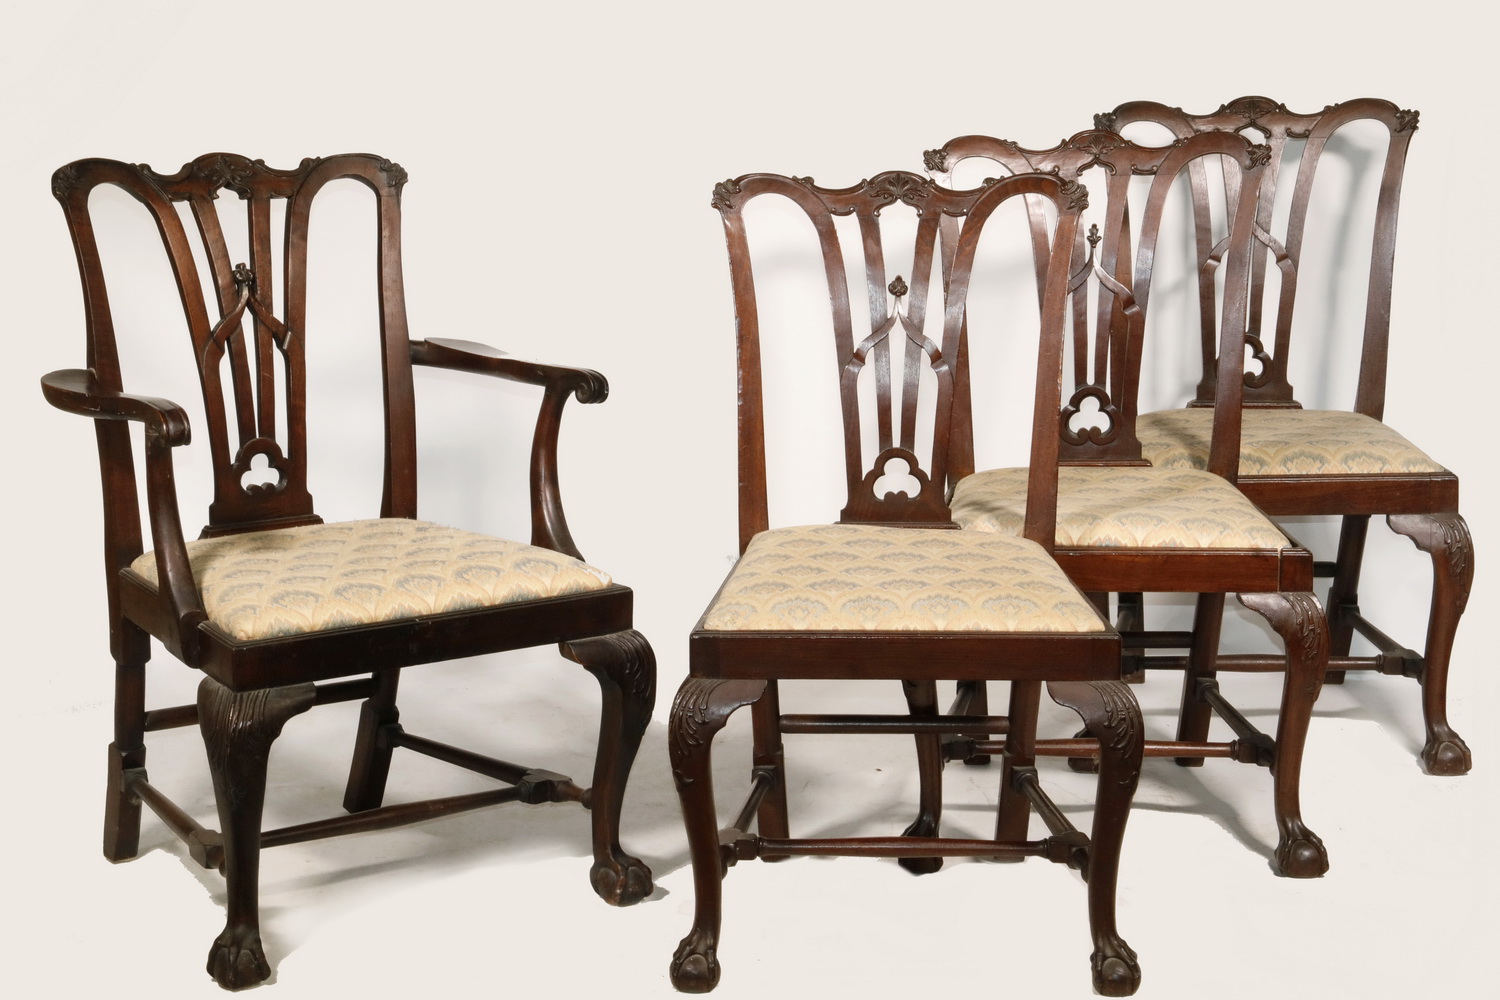  8 MAHOGANY CHIPPENDALE CHAIRS 2b3a26